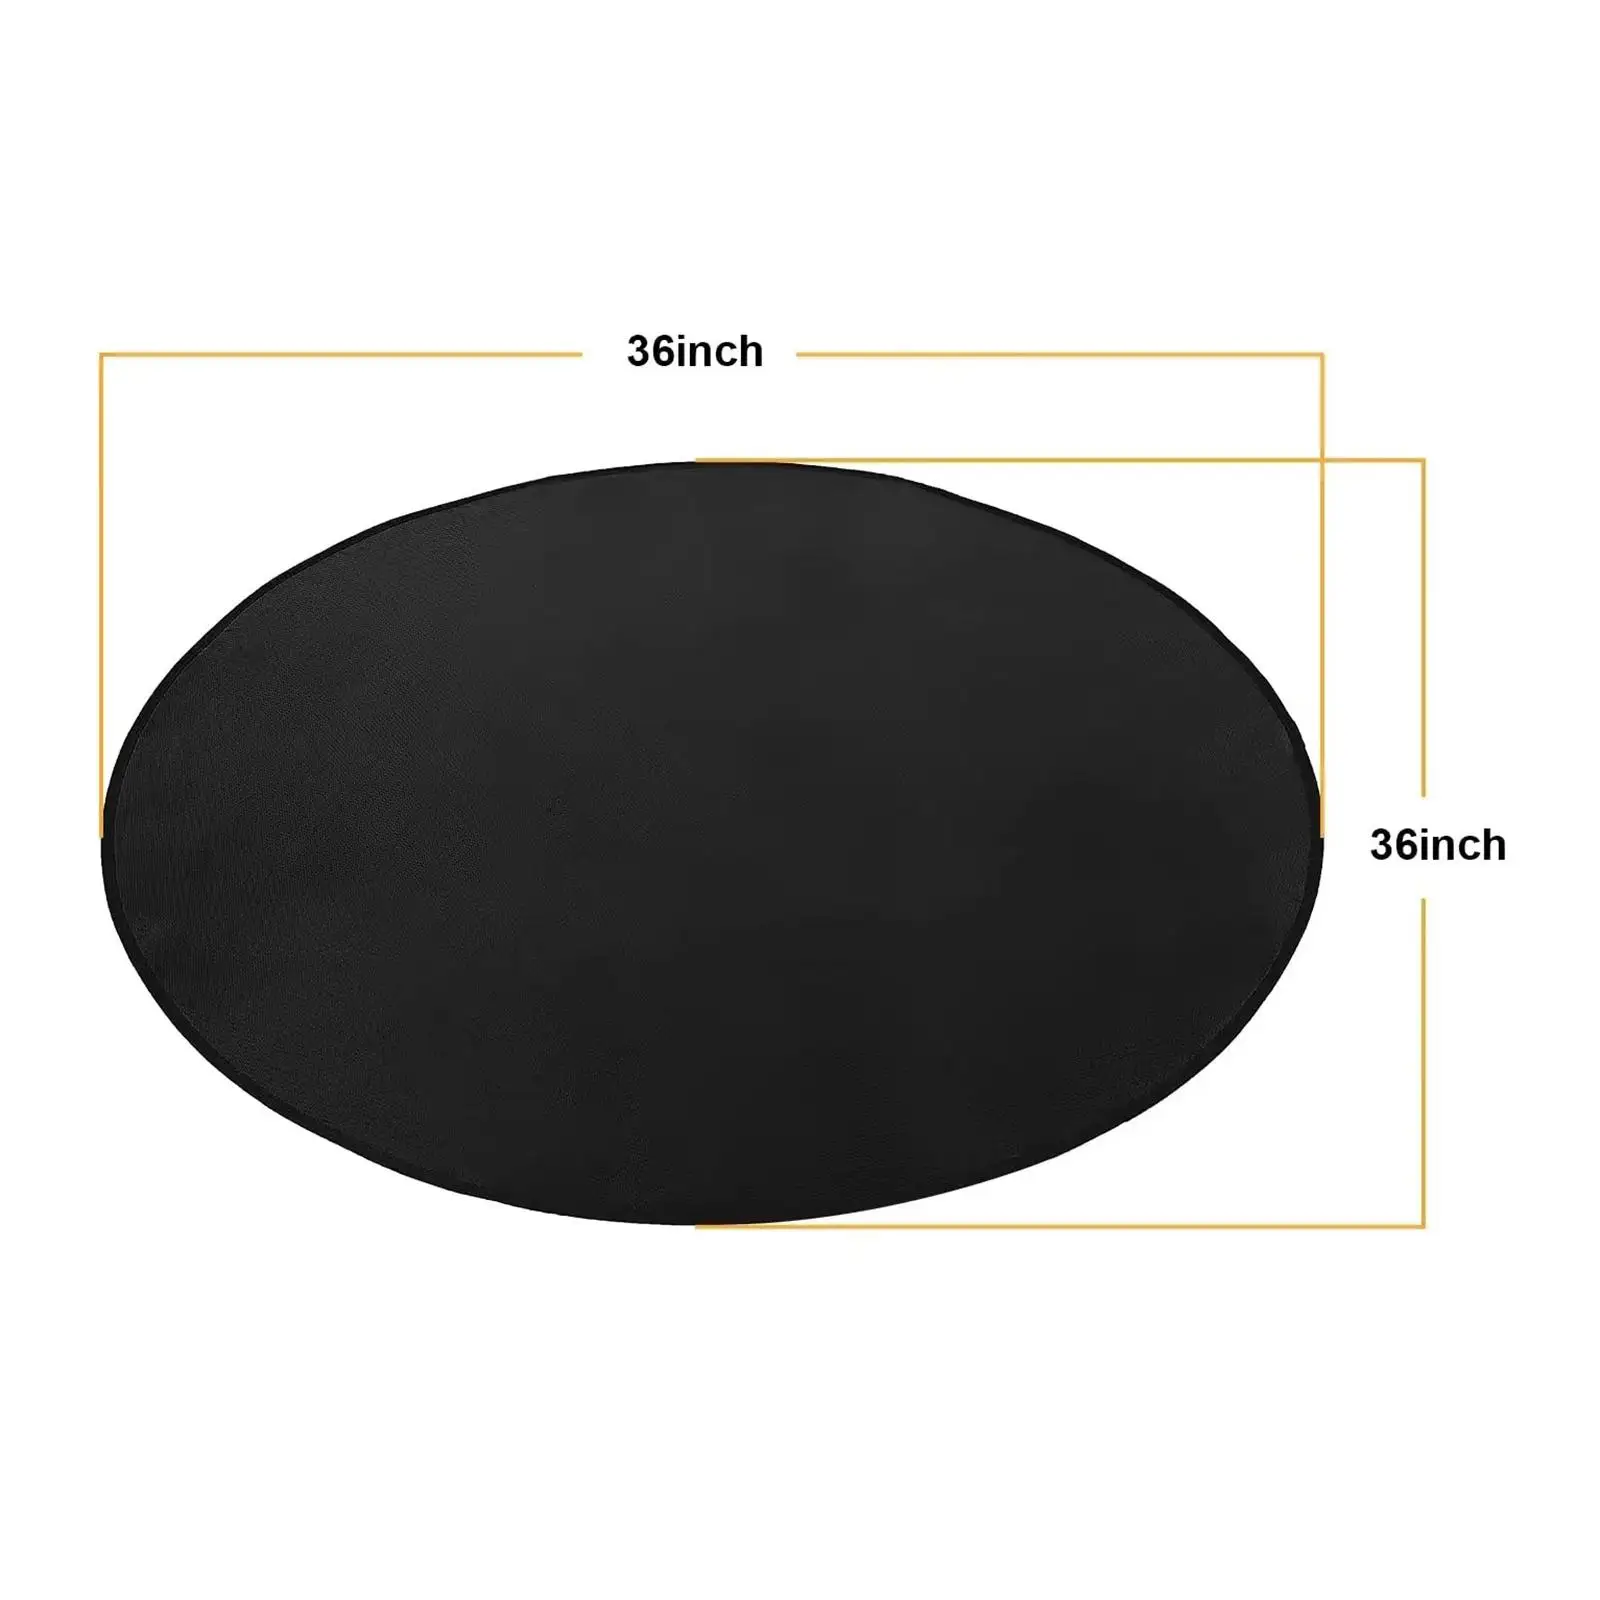 36inch Fire Mat under Grill Mat Round Floor Protection Rug Barbecue Fire Blanket for BBQ Backyard Indoor Outdoor Decking Patio